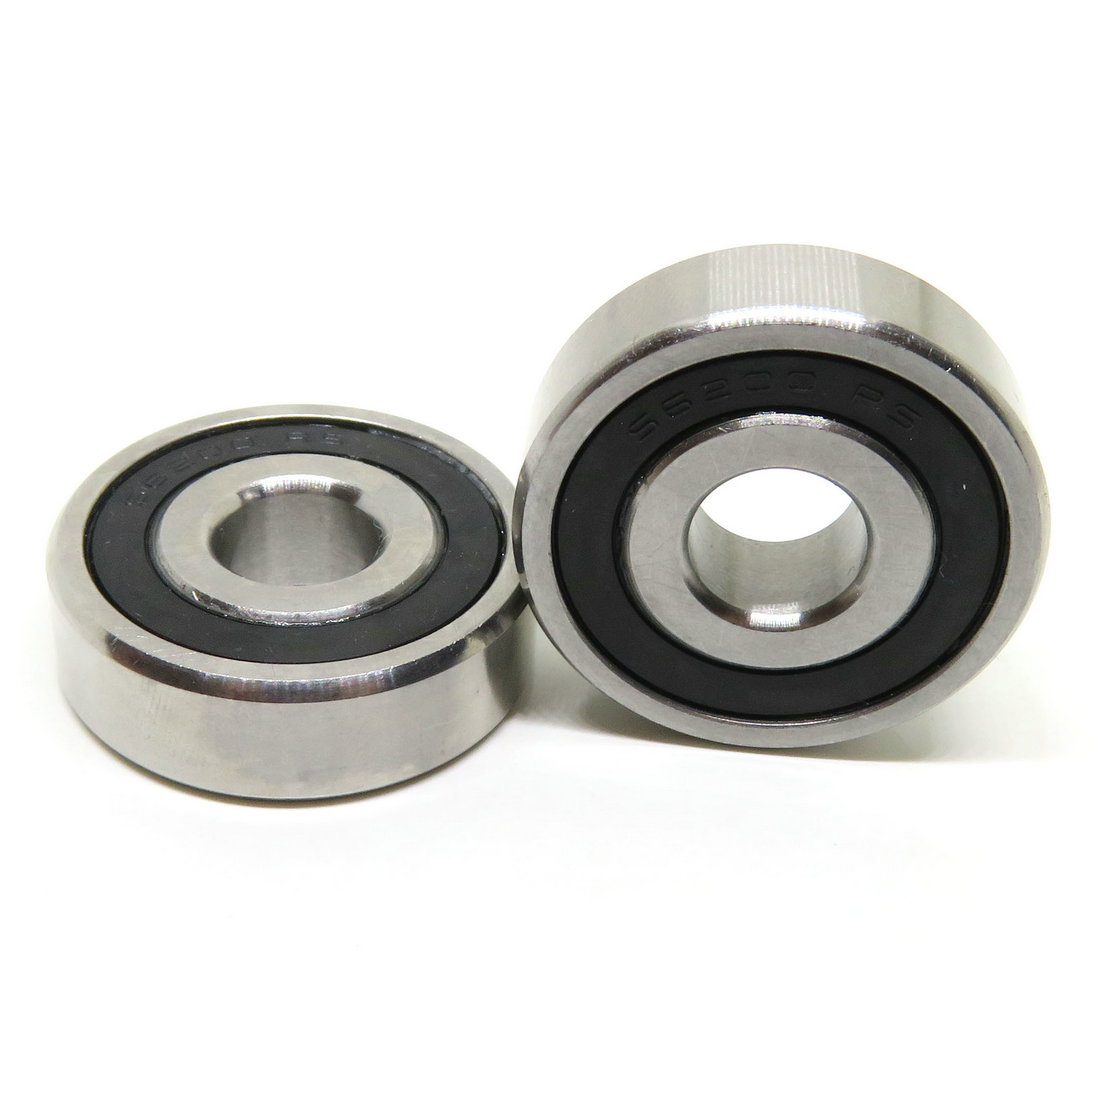 S6303-2RS AISI 440C Stainless Steel Ball Bearing 17x47x14mm For Heavier Load Capacity Applications.jpg